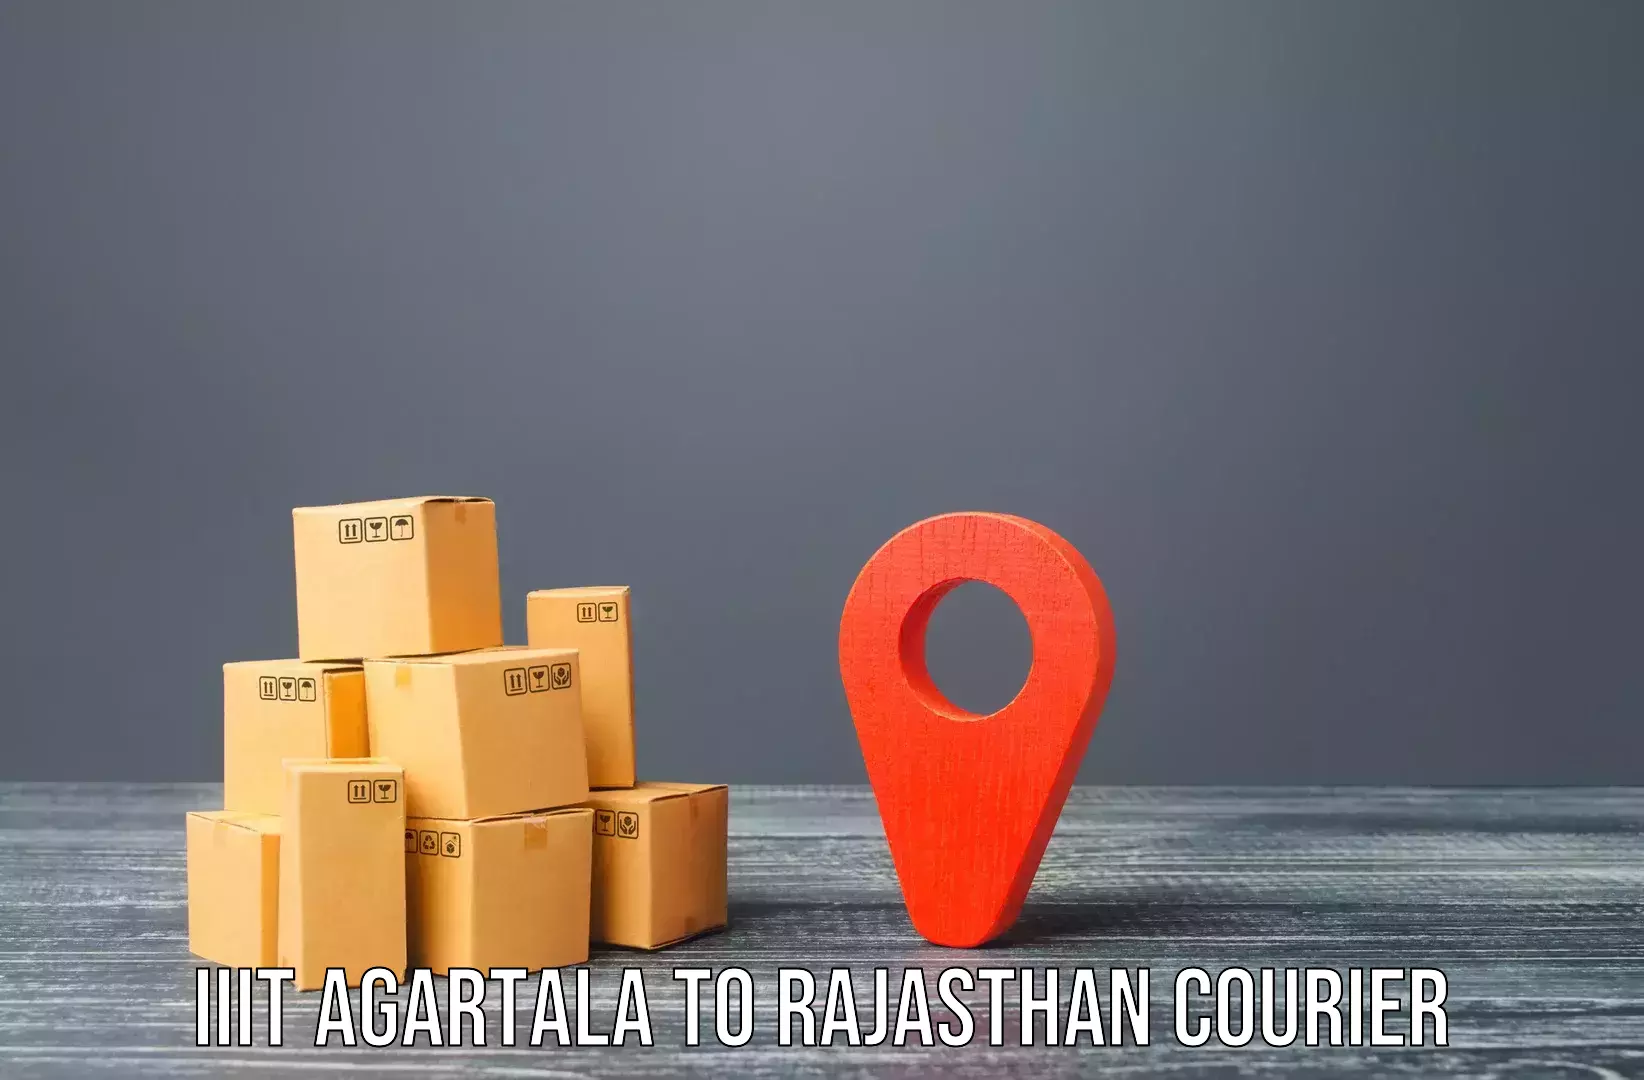 Home relocation and storage IIIT Agartala to Abu Road